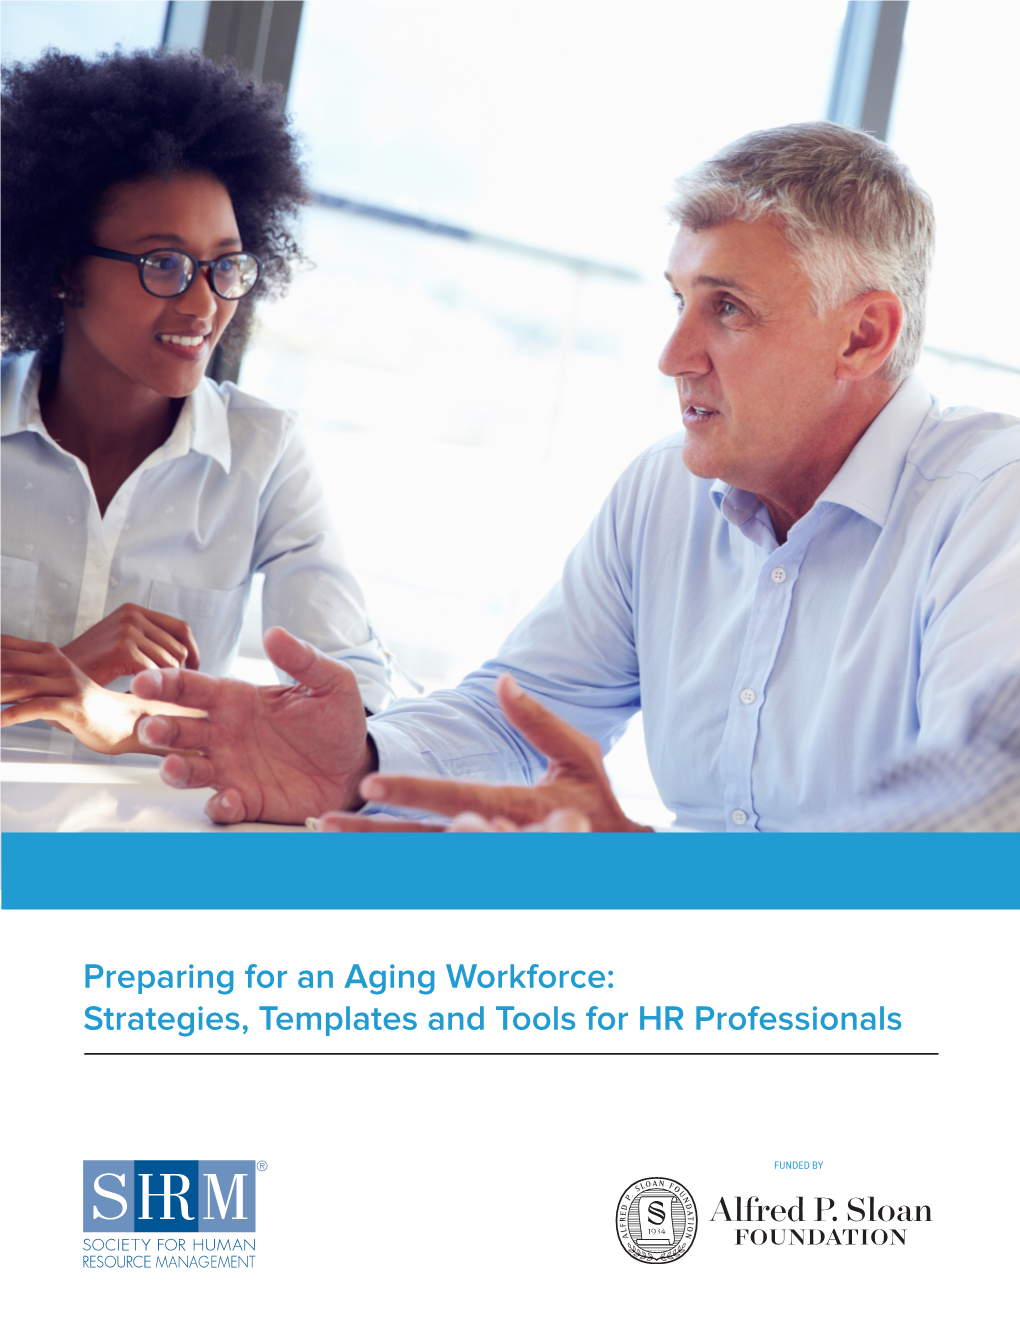 Preparing for an Aging Workforce: Strategies, Templates and Tools for HR Professionals